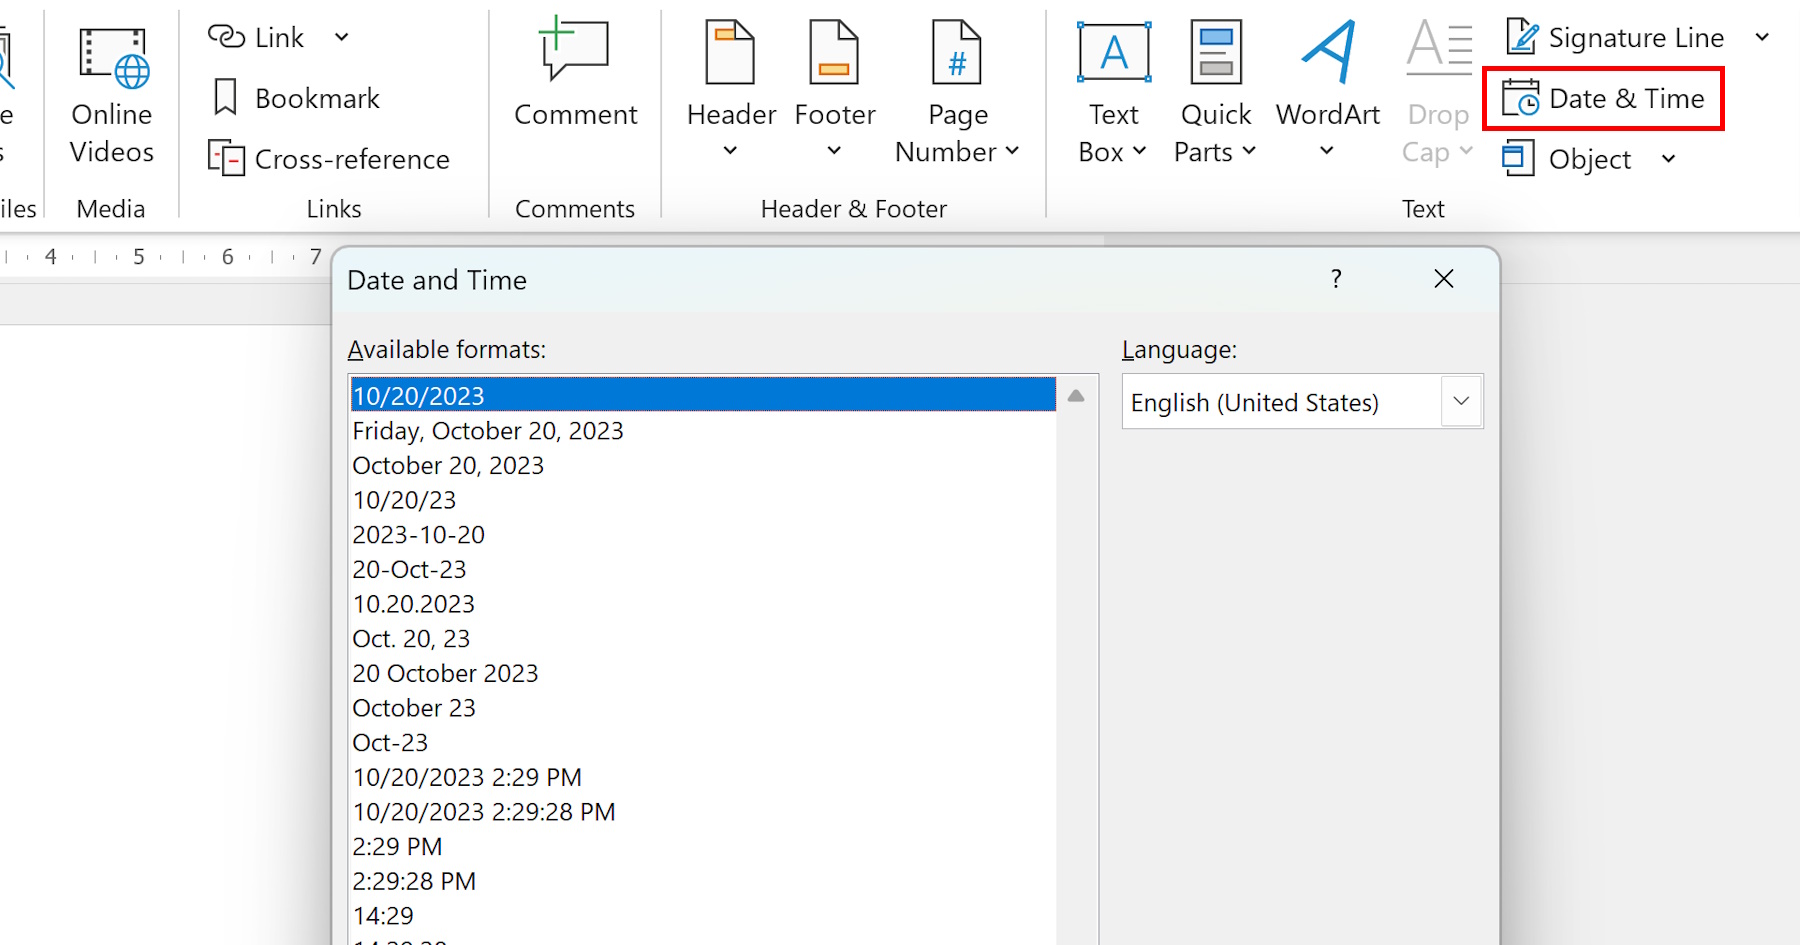 Learn how to effortlessly insert today's date in Word using different methods like the 'Date & Time' option, formula fields, macros, and the 'Field' option. Save time and keep your documents up-to-date!